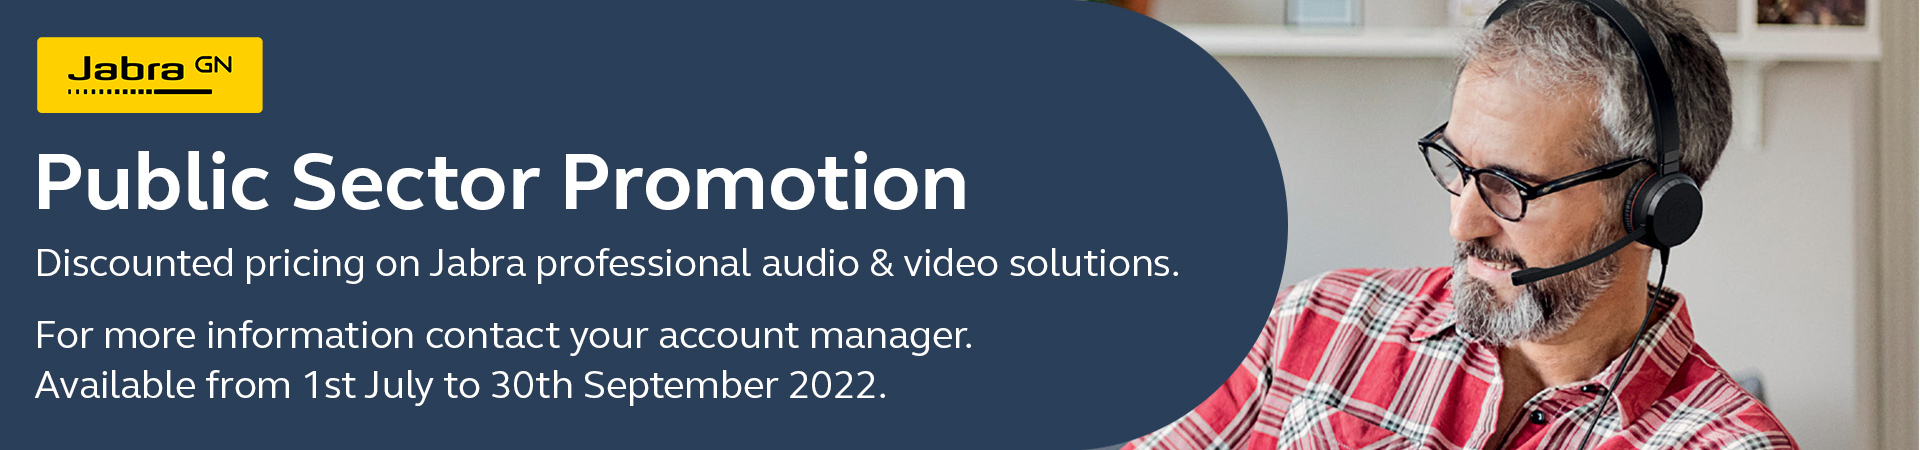 Jabra GN - Public Sector Promotion. Discounted pricing on Jabra professional audio & video solutions. For more information contract your account manager. Available from 1st July to 30th September 2022.